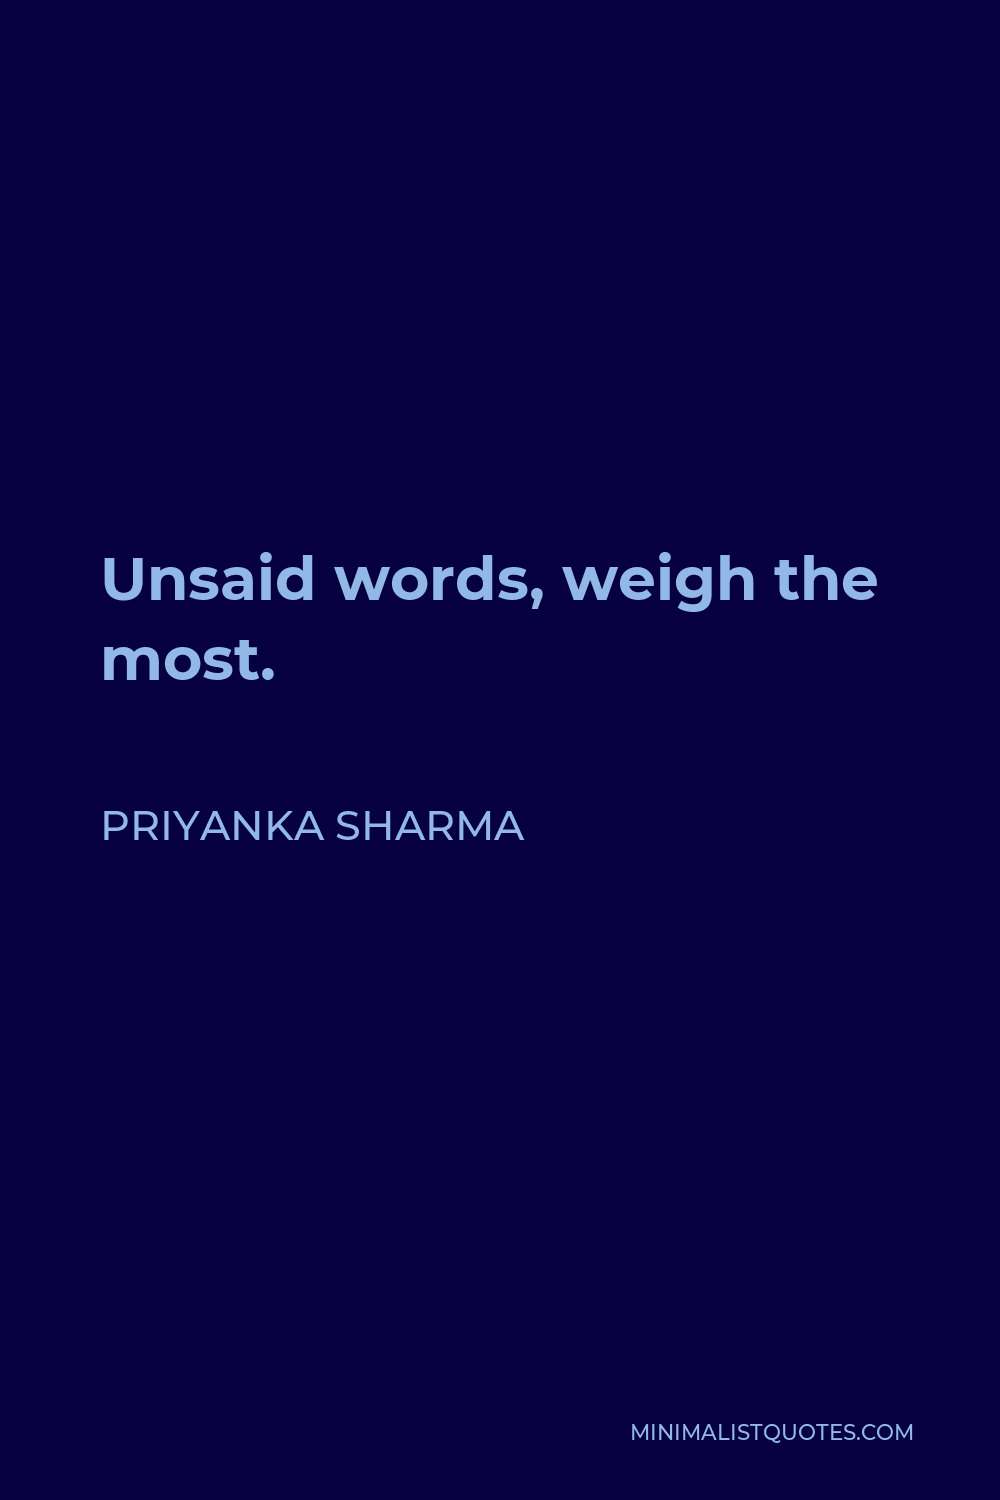 Priyanka Sharma Quote - Unsaid words, weigh the most.